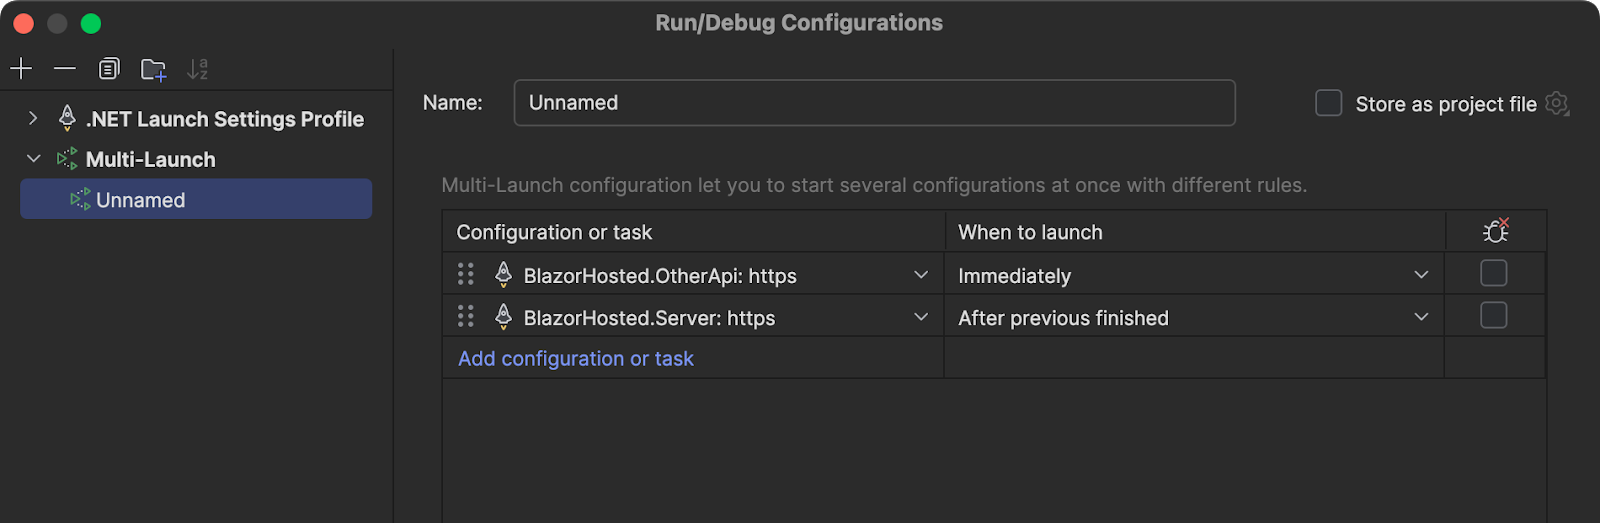 Multi-launch run configuration with API and Server tasks